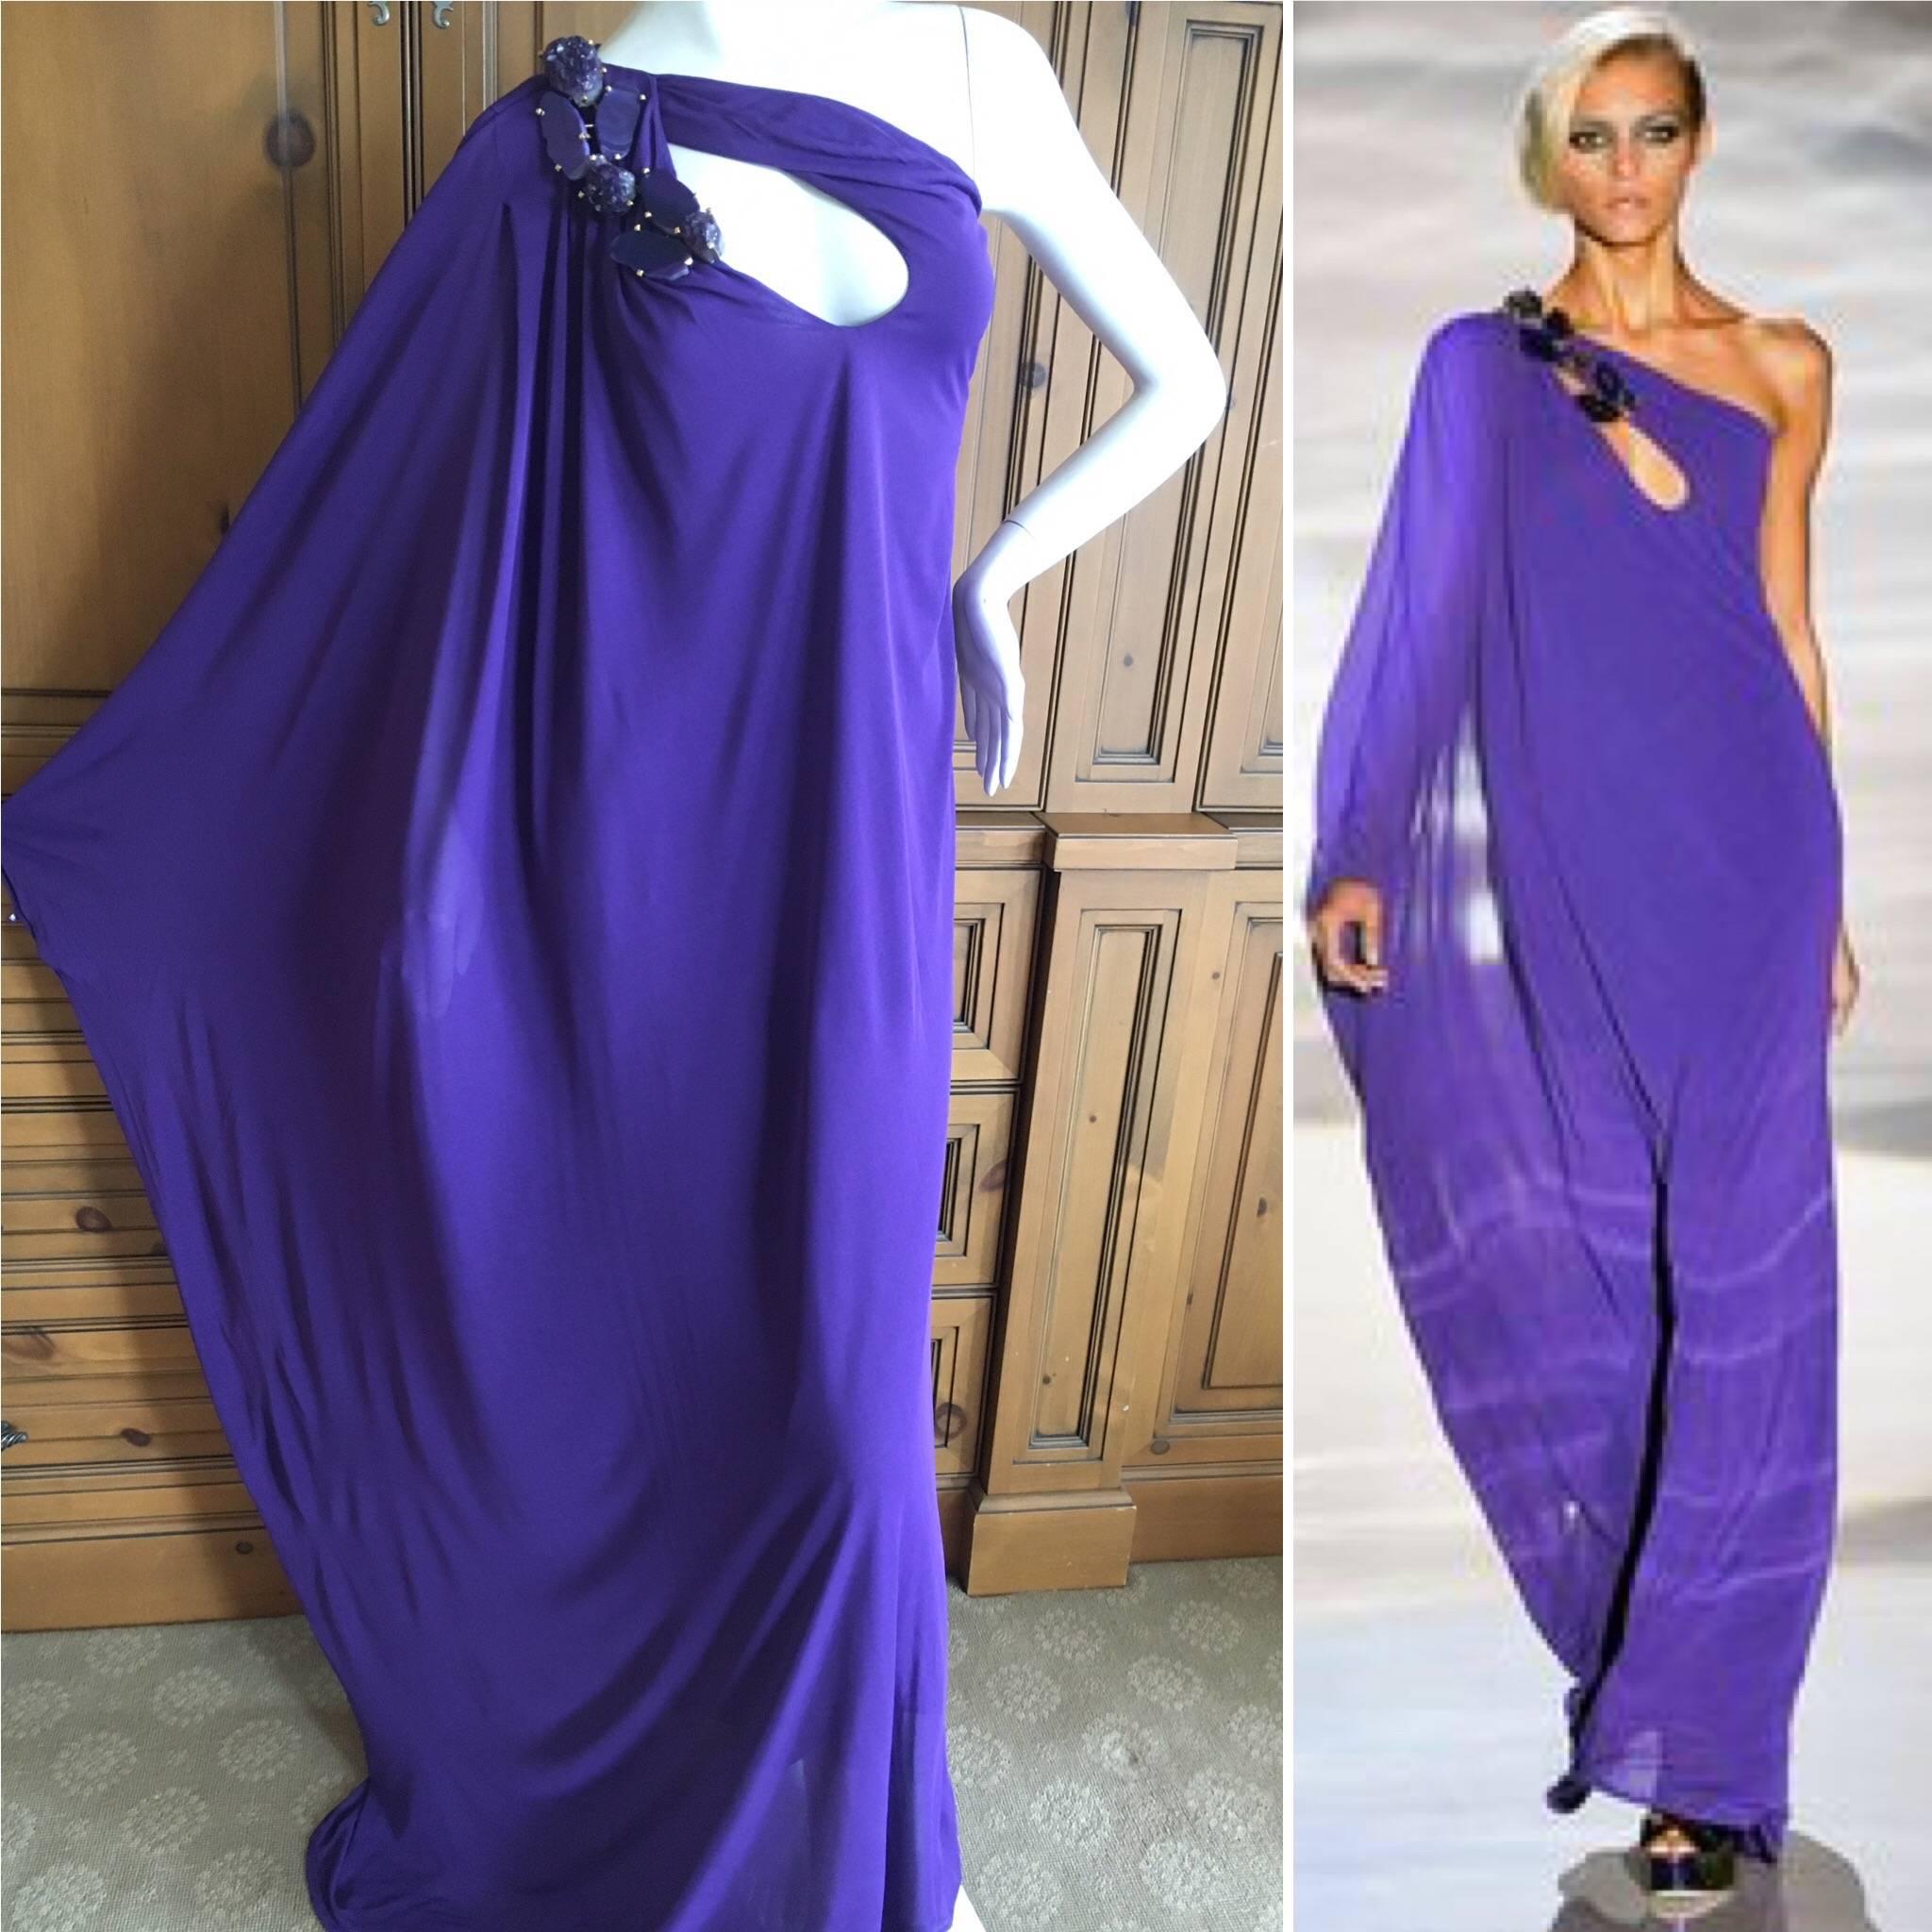 Gucci Dramatic One Shoulder Purple Evening Dress with Detachable Agate Stone Pin.
This is stunning, can be worn with or with out the pin.
The pin is huge and could also be worn on a blazer.
Size 38
 Bust 38"
Waist 28"
Hips 44"
Length